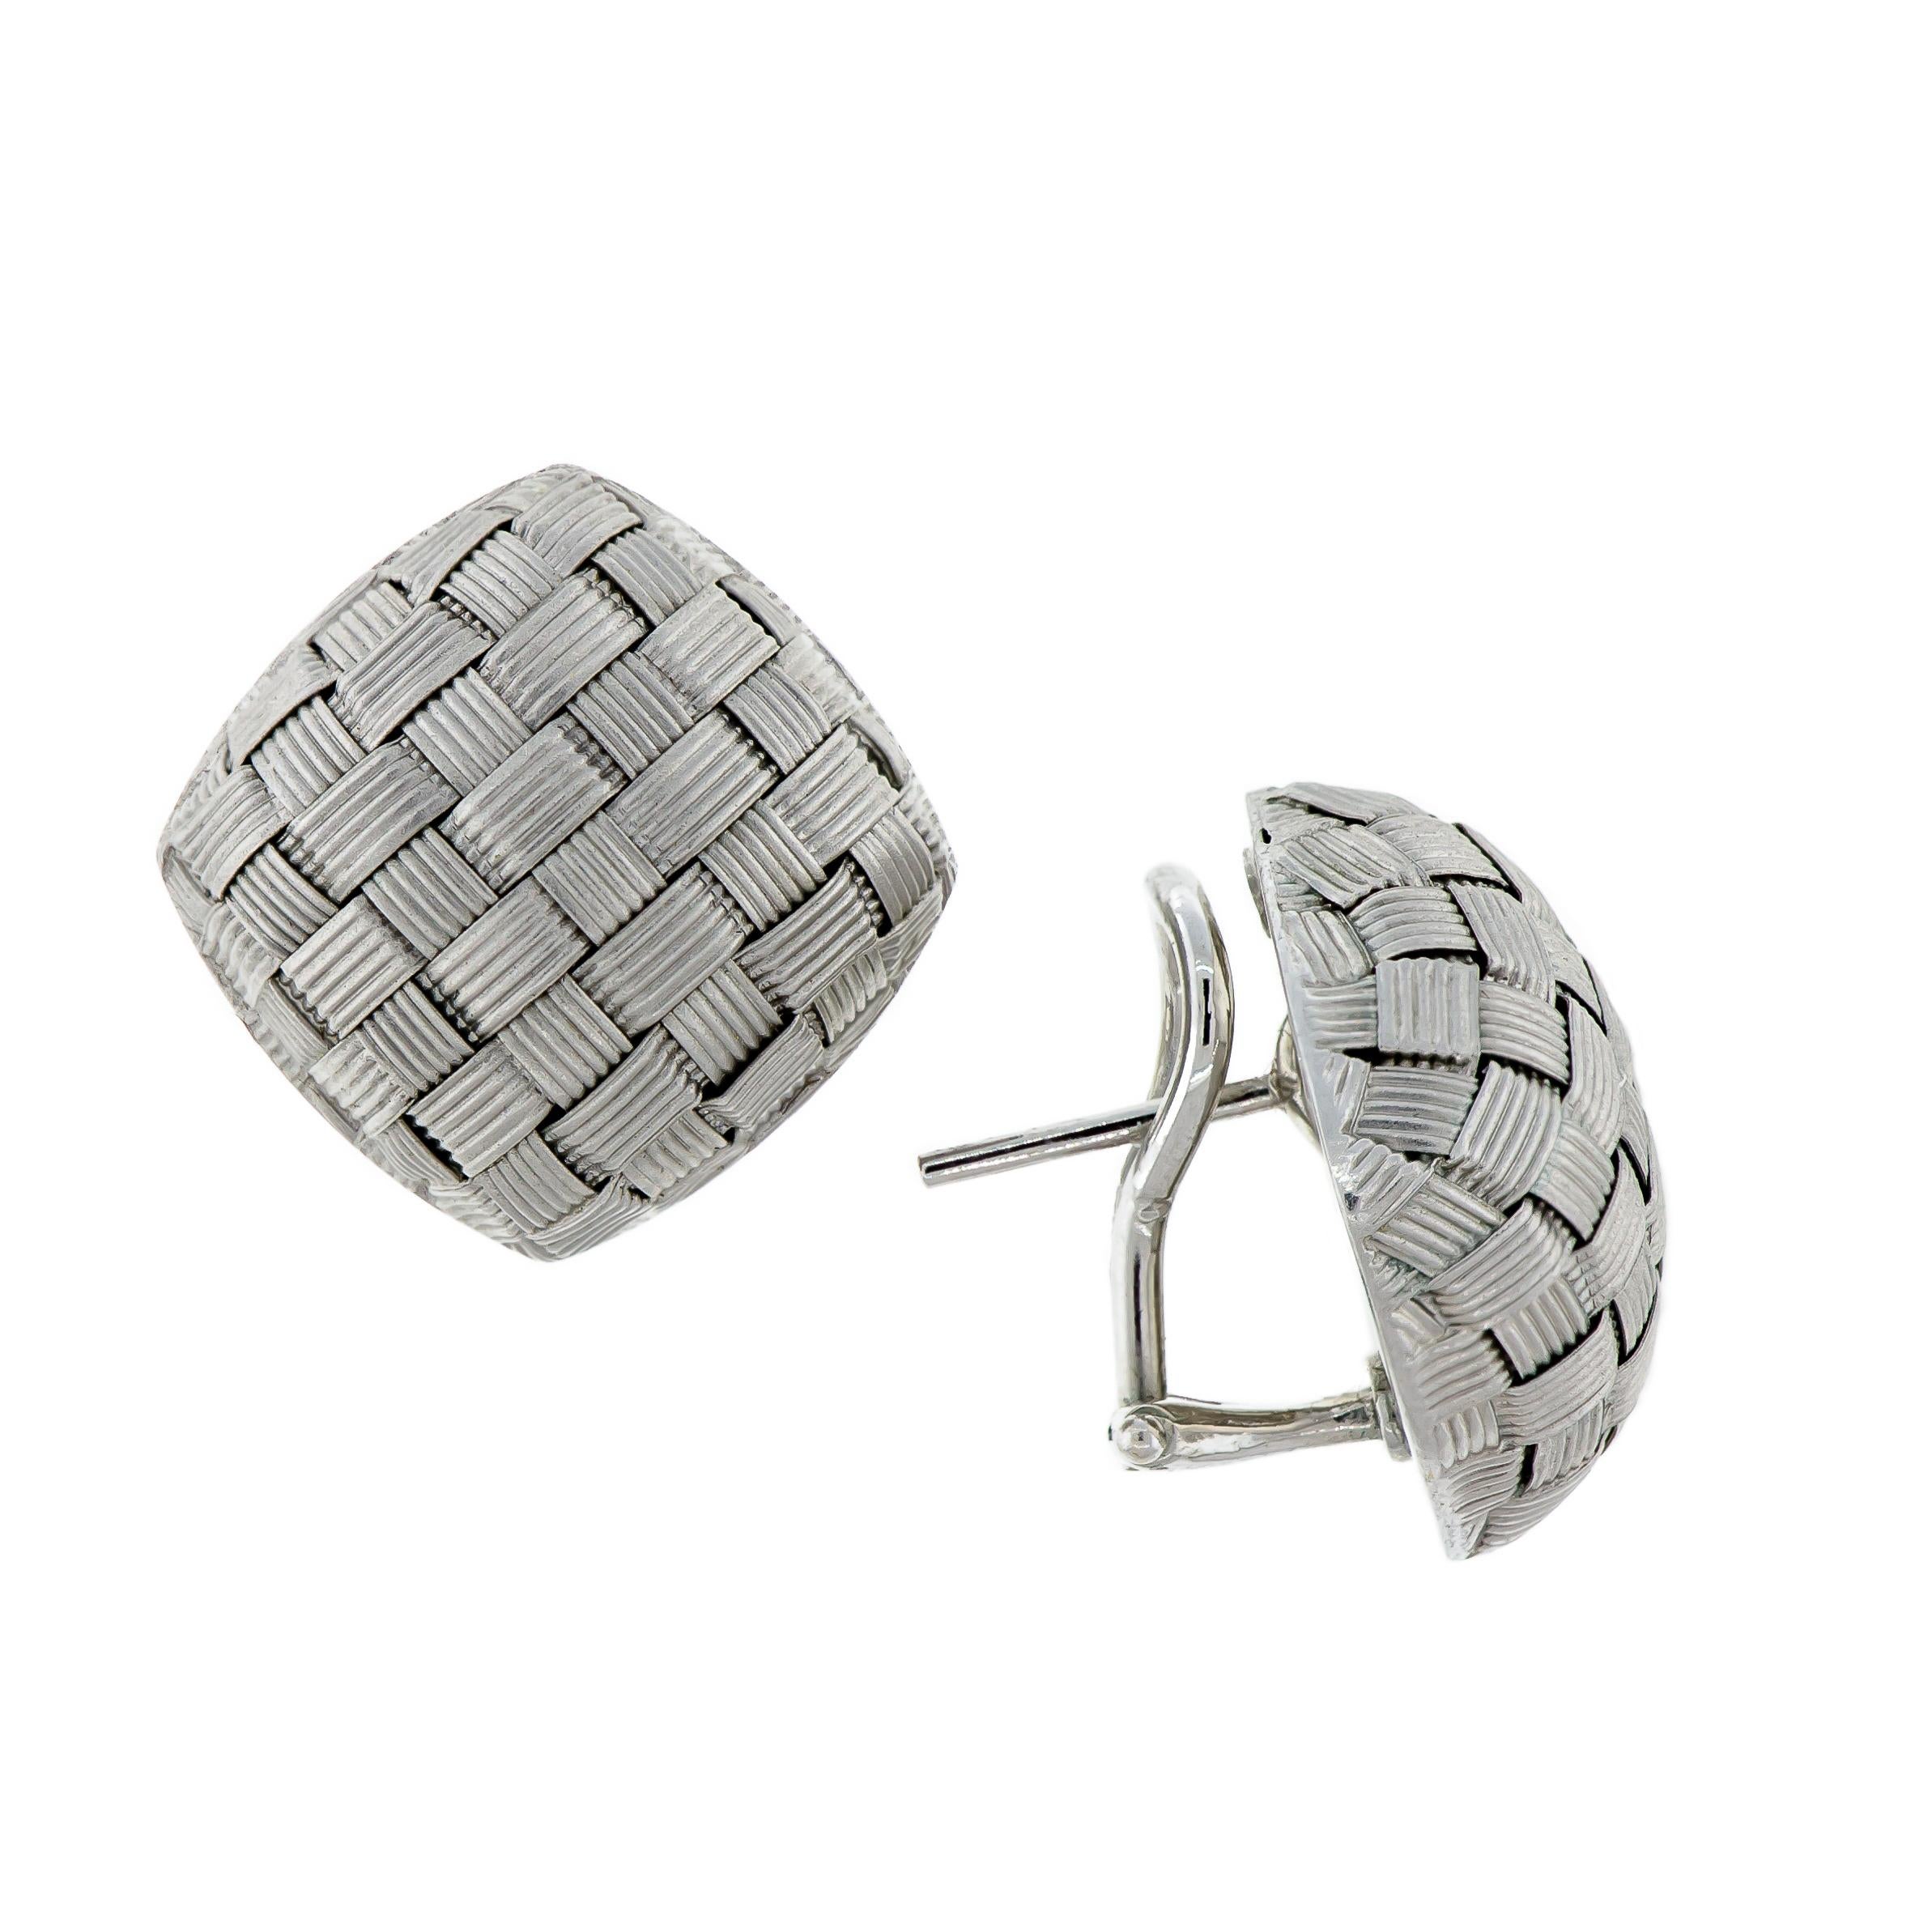 A striking pair of 18 kt white gold Roberto Coin Appassionata Earclips. Decorated with a sophisticated basket-weave texture which embodies the domed surface of these square Italian earrings. Each one has a stamp on the reverse that sits under each